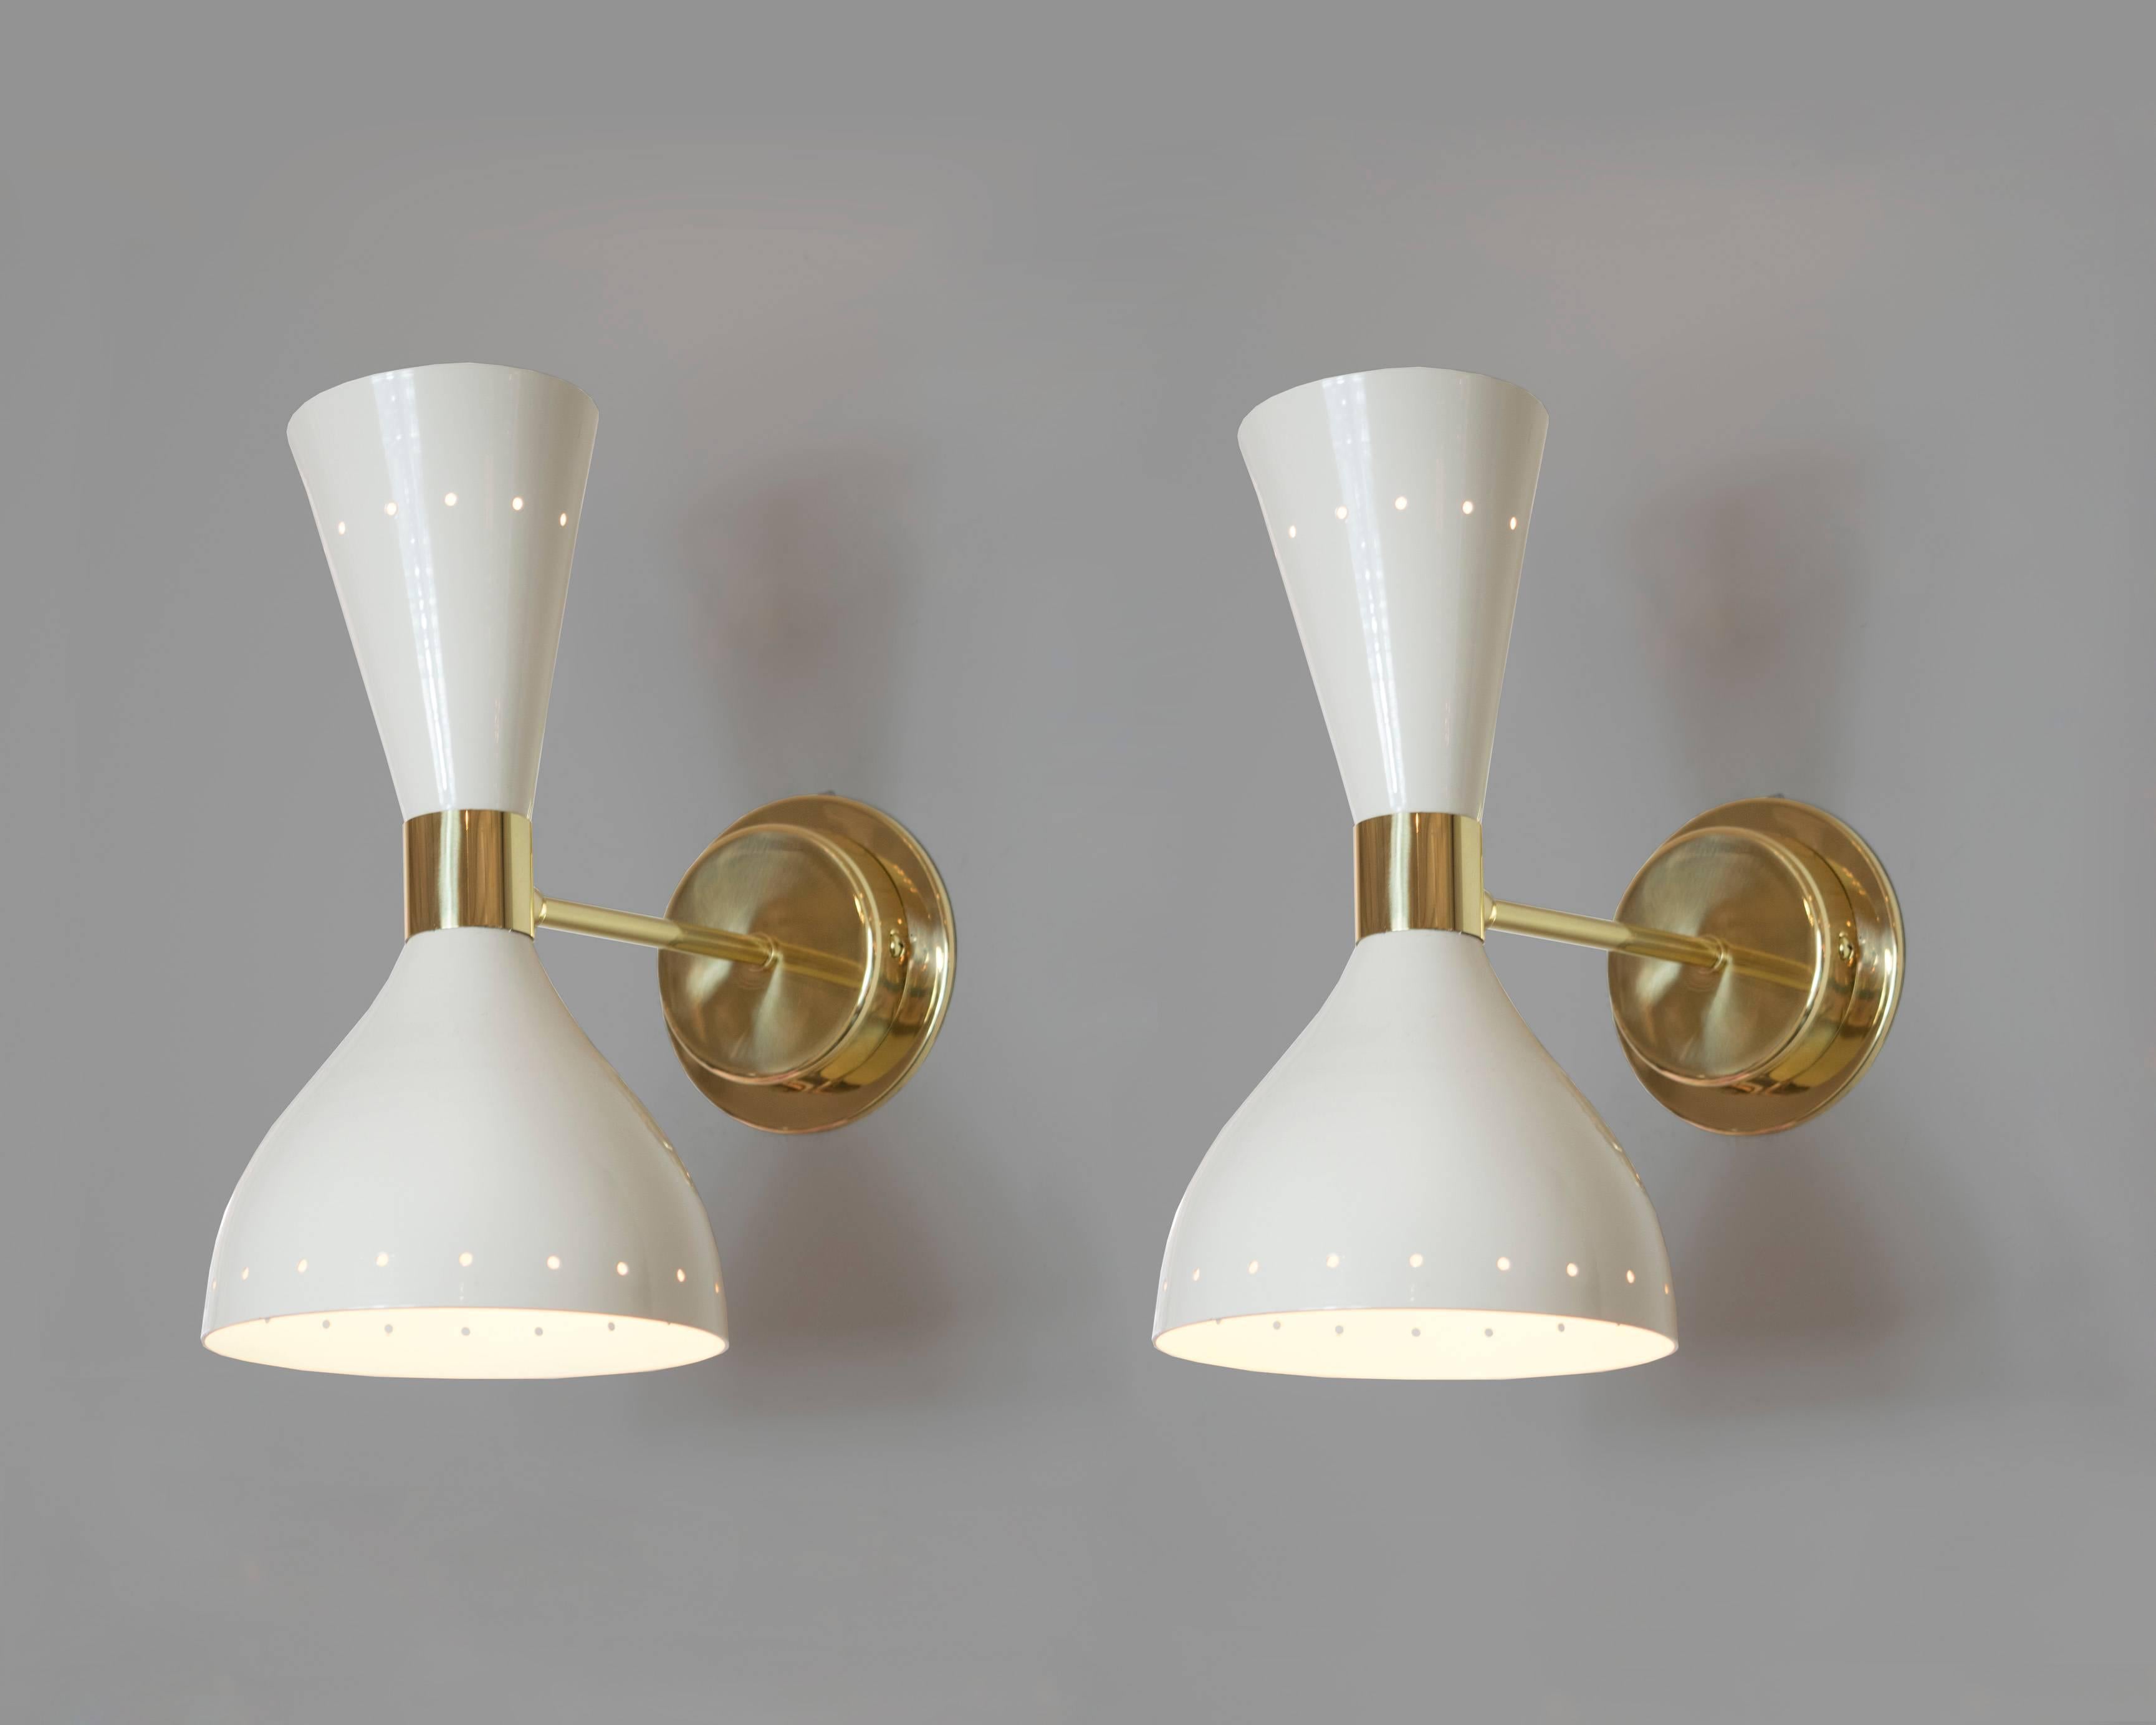 A pair of Stilnovo white lacquer and brass sconces with both up and down lighting in a conical shape. The outer rim extends 11.5 inches from the wall and the upper cone has a ring of perforated circles to add more drama to the pair. 